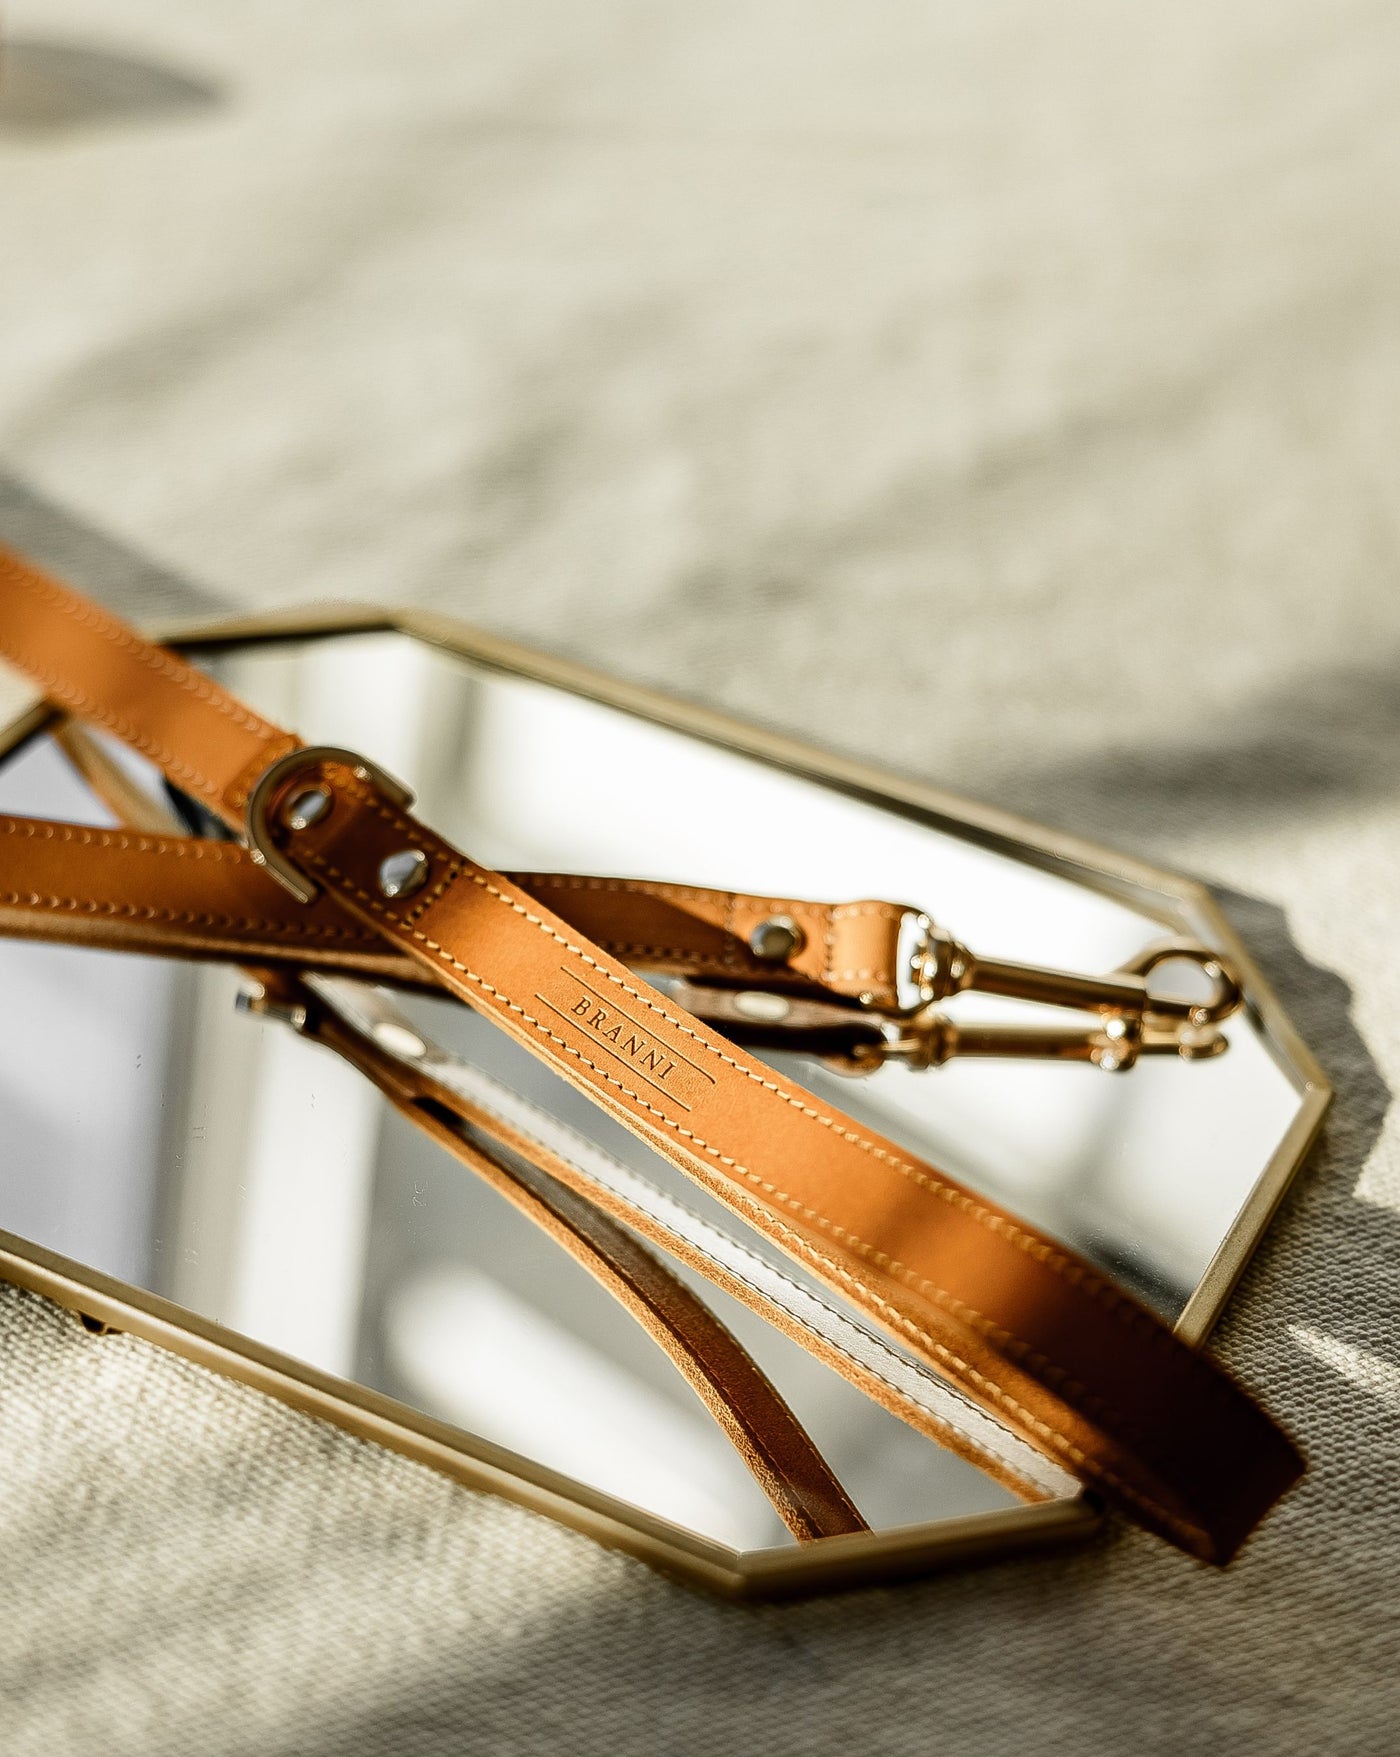 Rocco Leash in Tan and Yellow Leather Product Image Detail